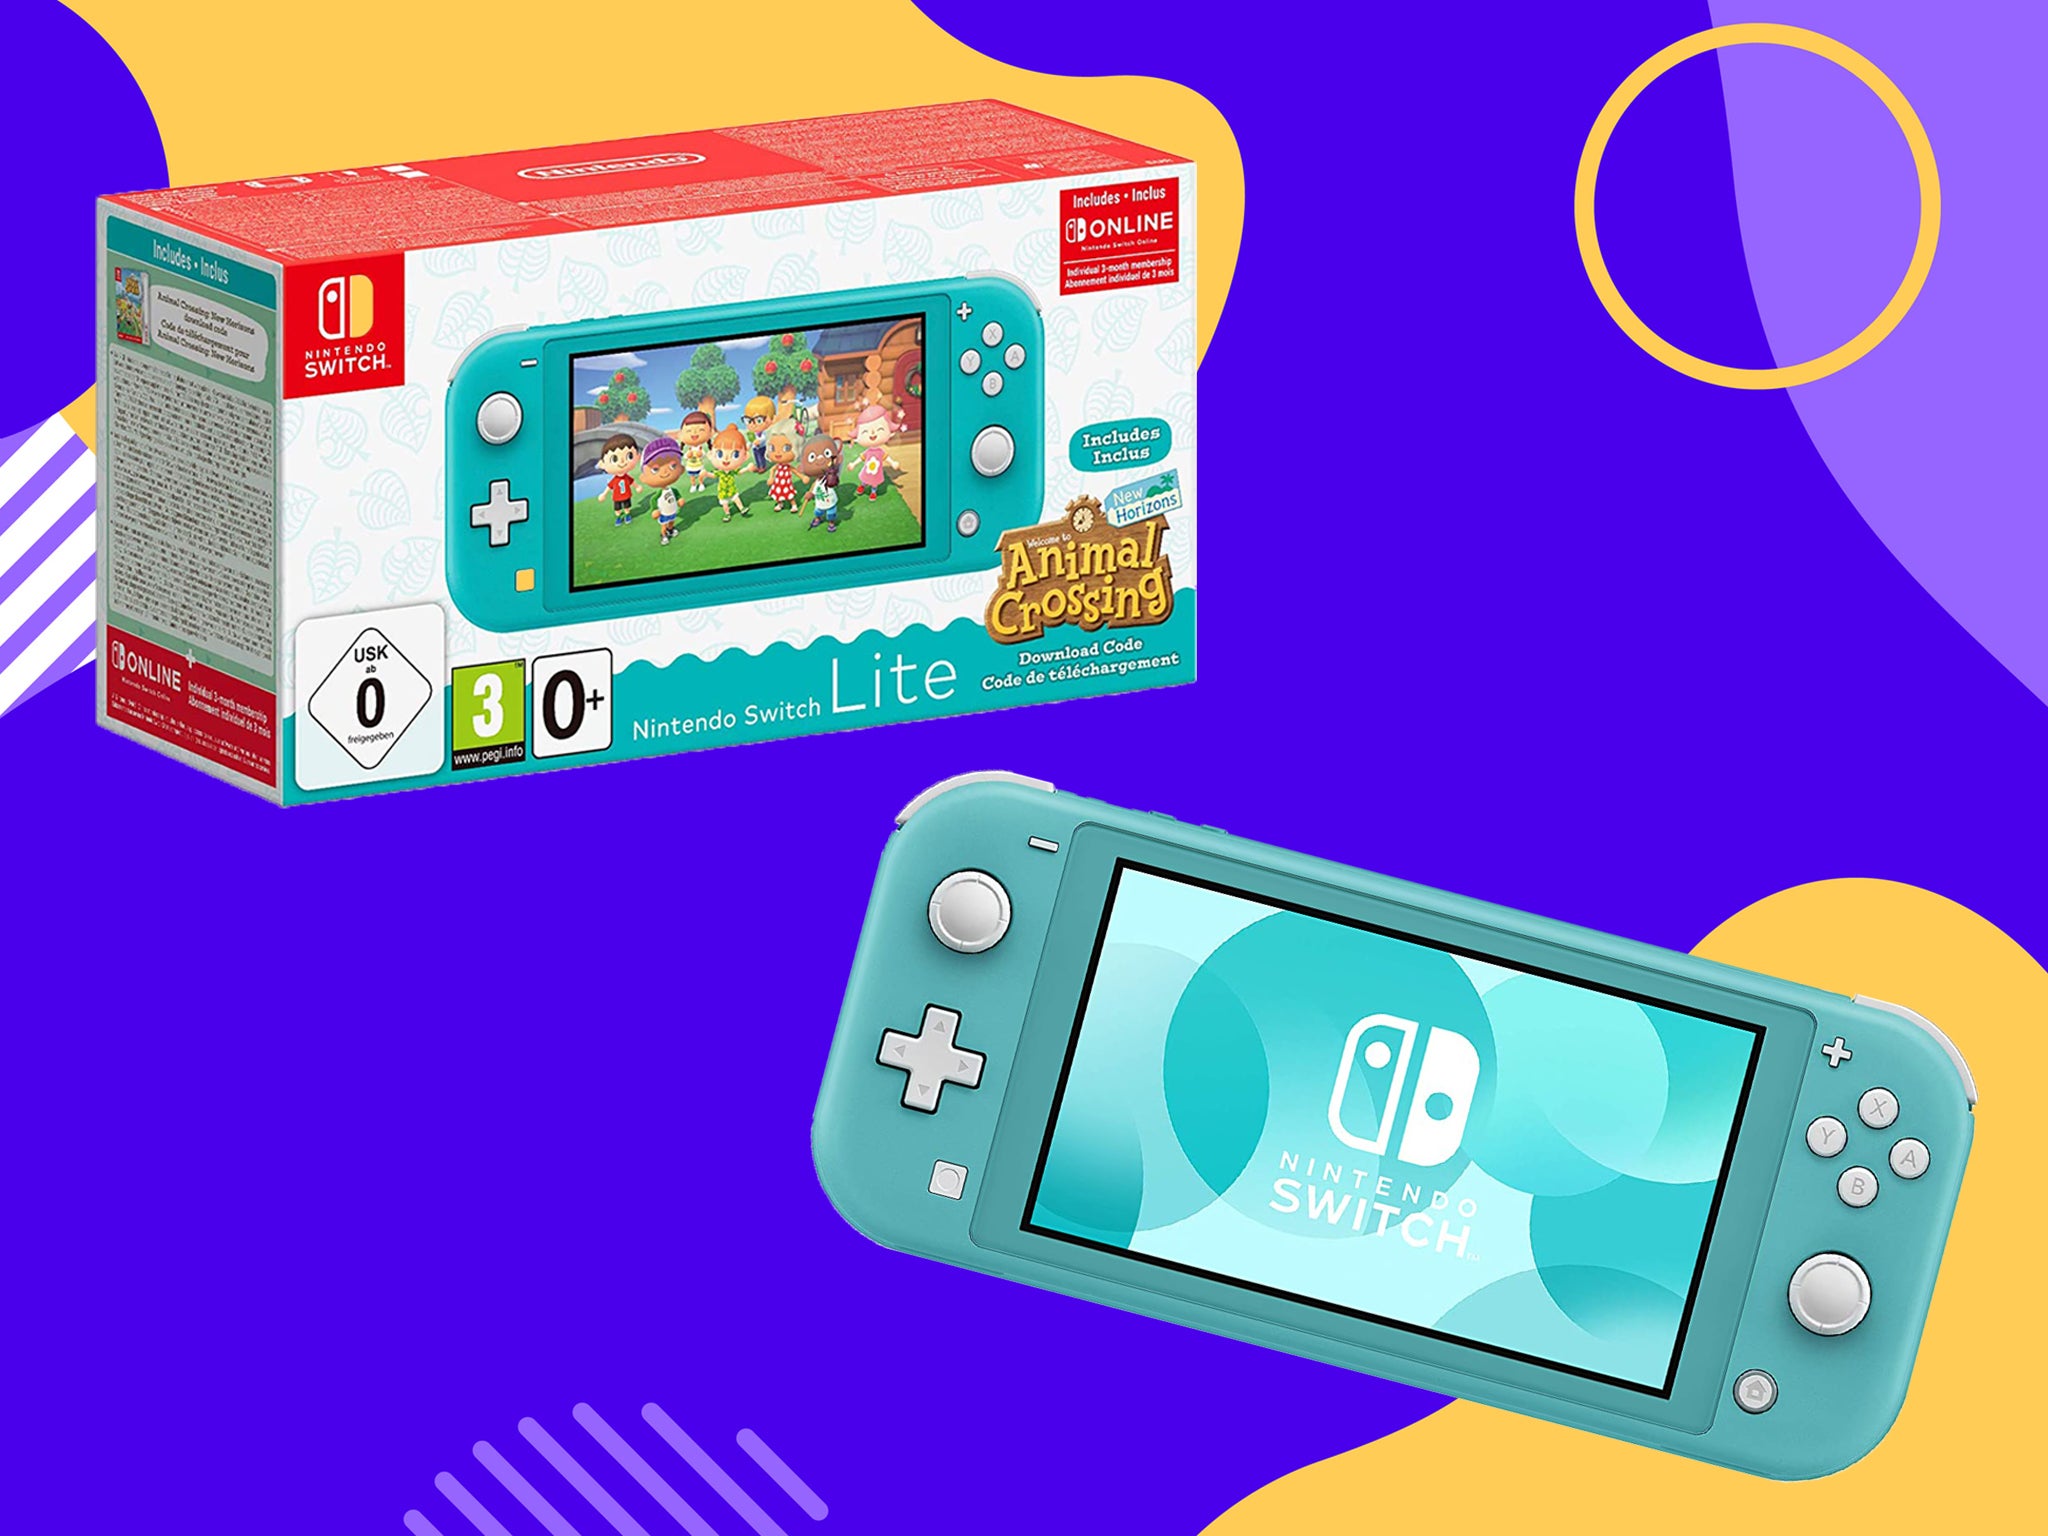 Nintendo Switch Lite: Amazon's January sales 2021 deal | The